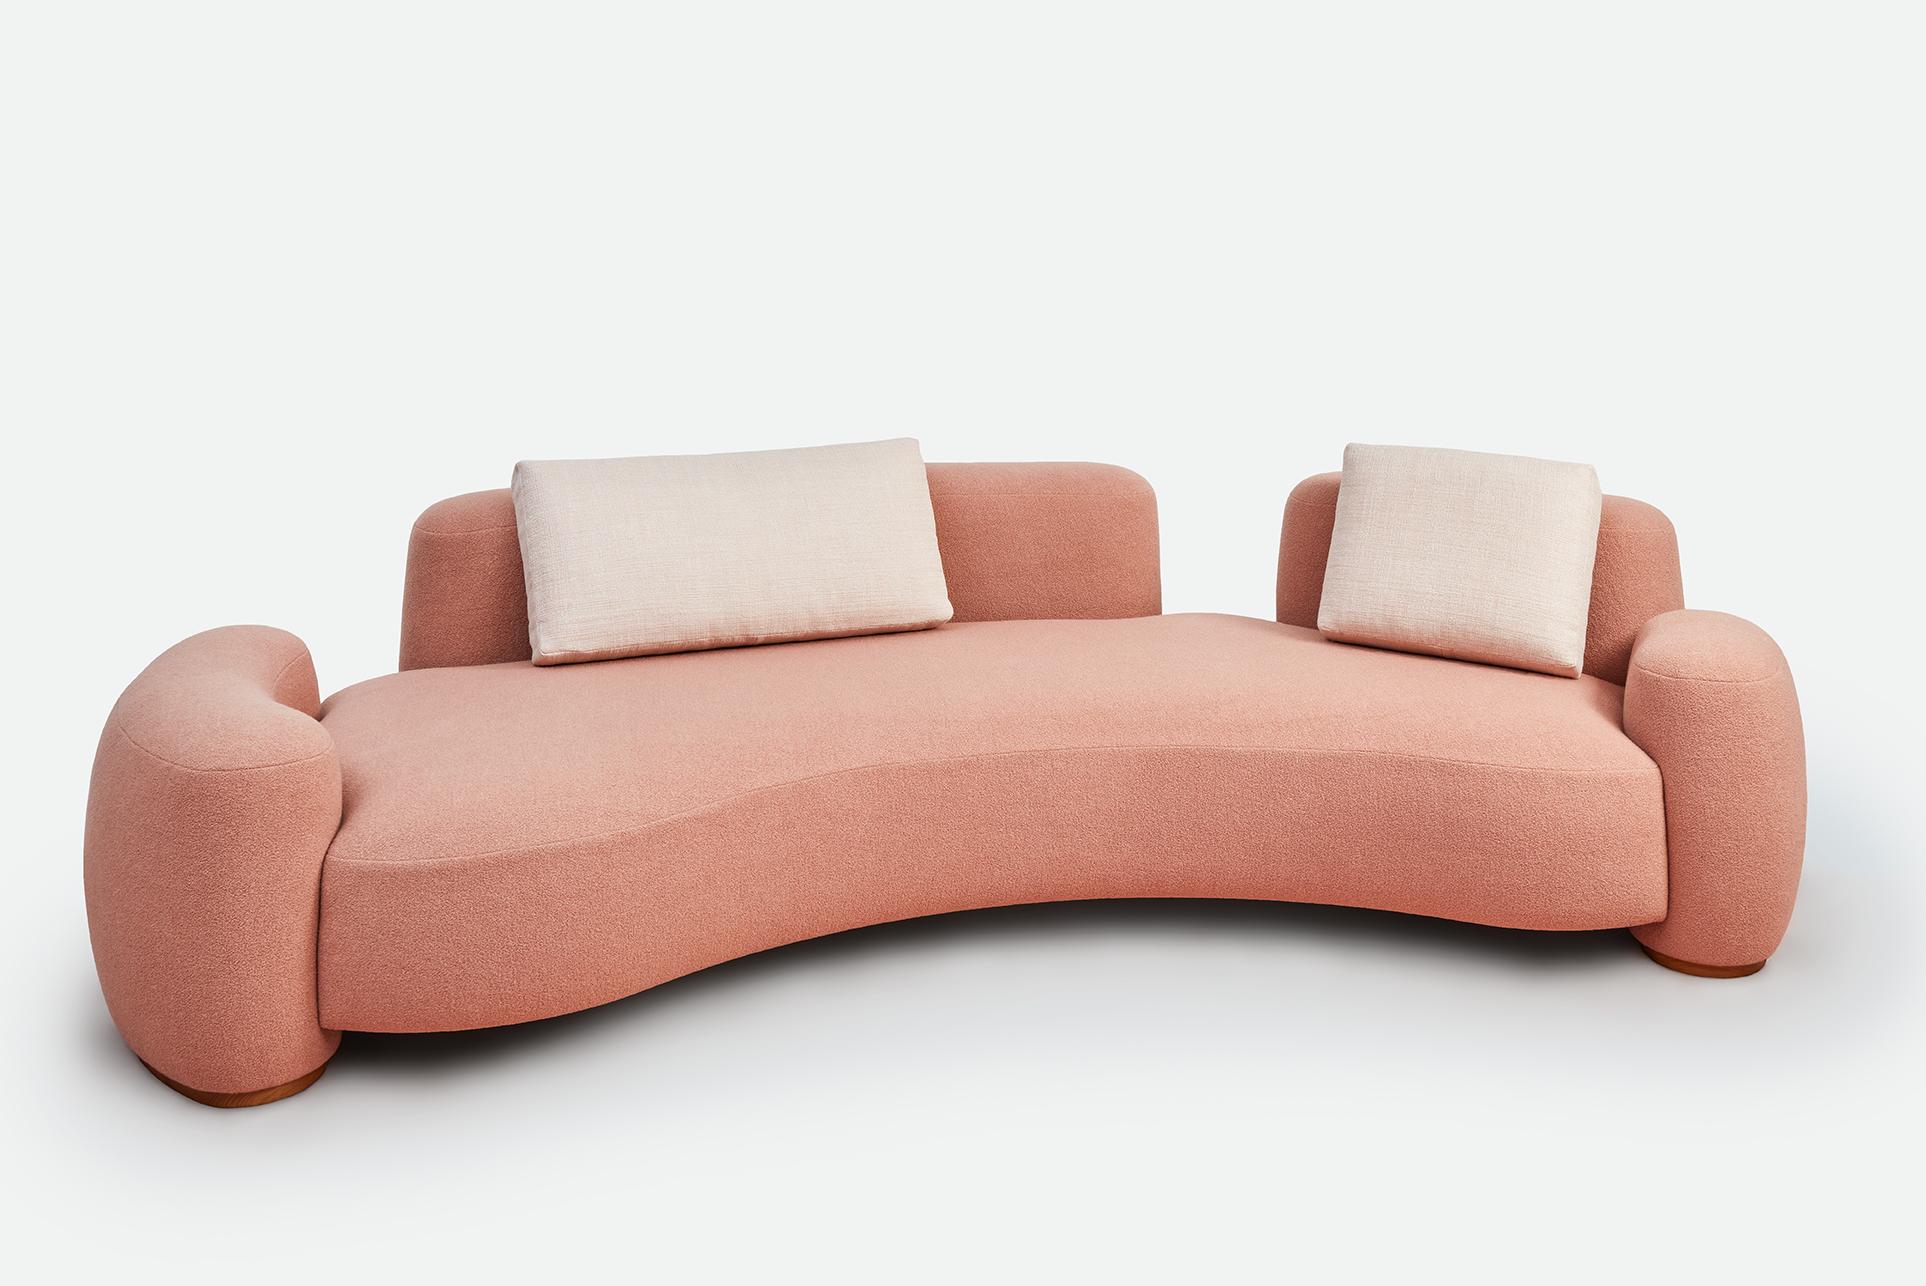 Pink Baba Sofa by Gisbert Pöppler
Dimensions: H 74 (SH43) x W 303 x D 140.5 cm
Materials: Upholstered wooden frame, teak footings

Like a friend that wants to cuddle, Baba is an upholstered sofa series for lounging in complete comfort. The